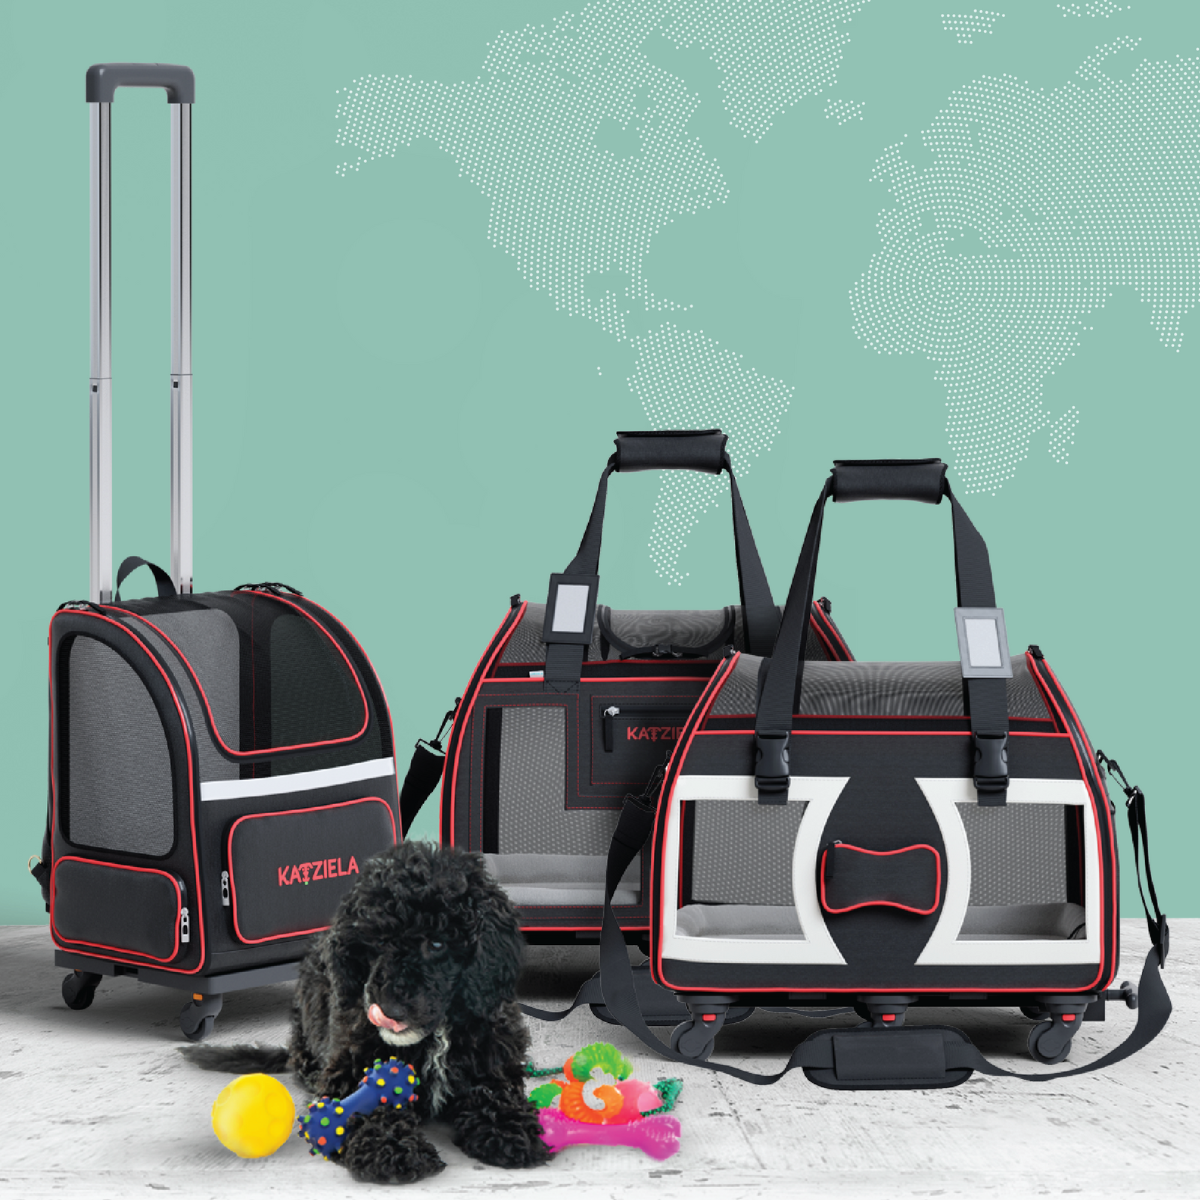 Dropship Pet Carrier Airline Approved Pet Carrier Puppy Dog